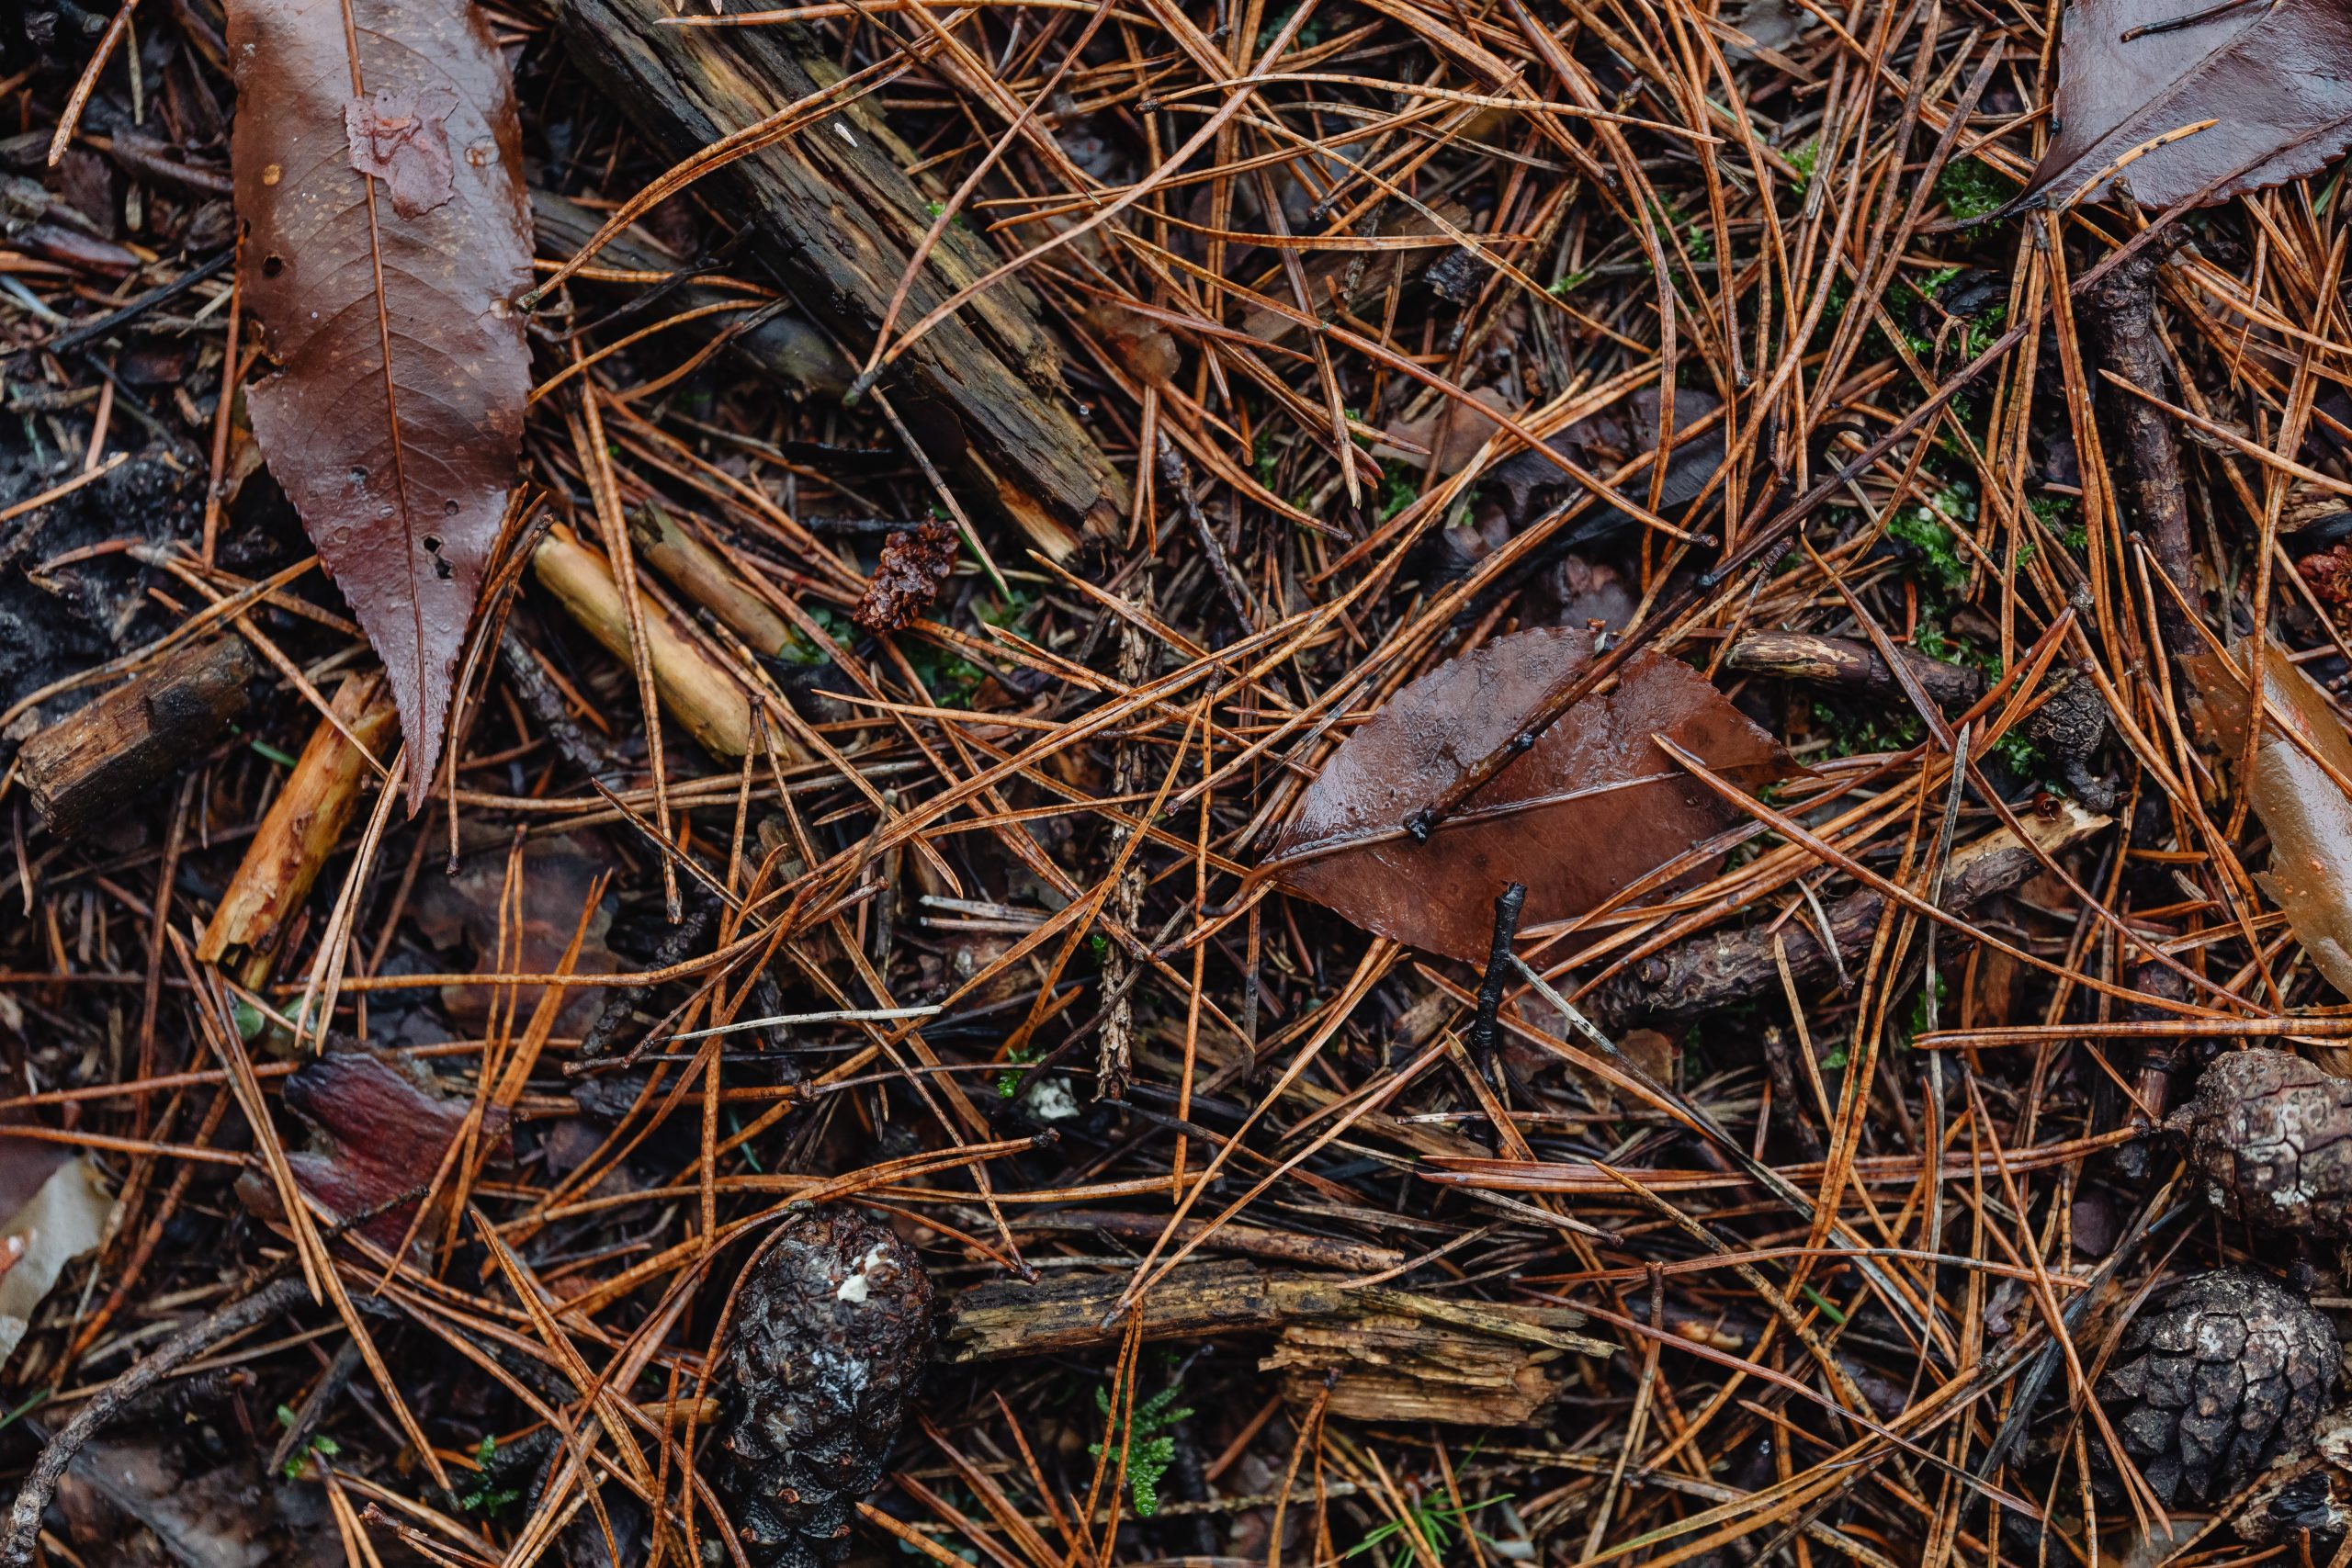 Brown pine needles on a forest floor, with some leaves and pine cones.